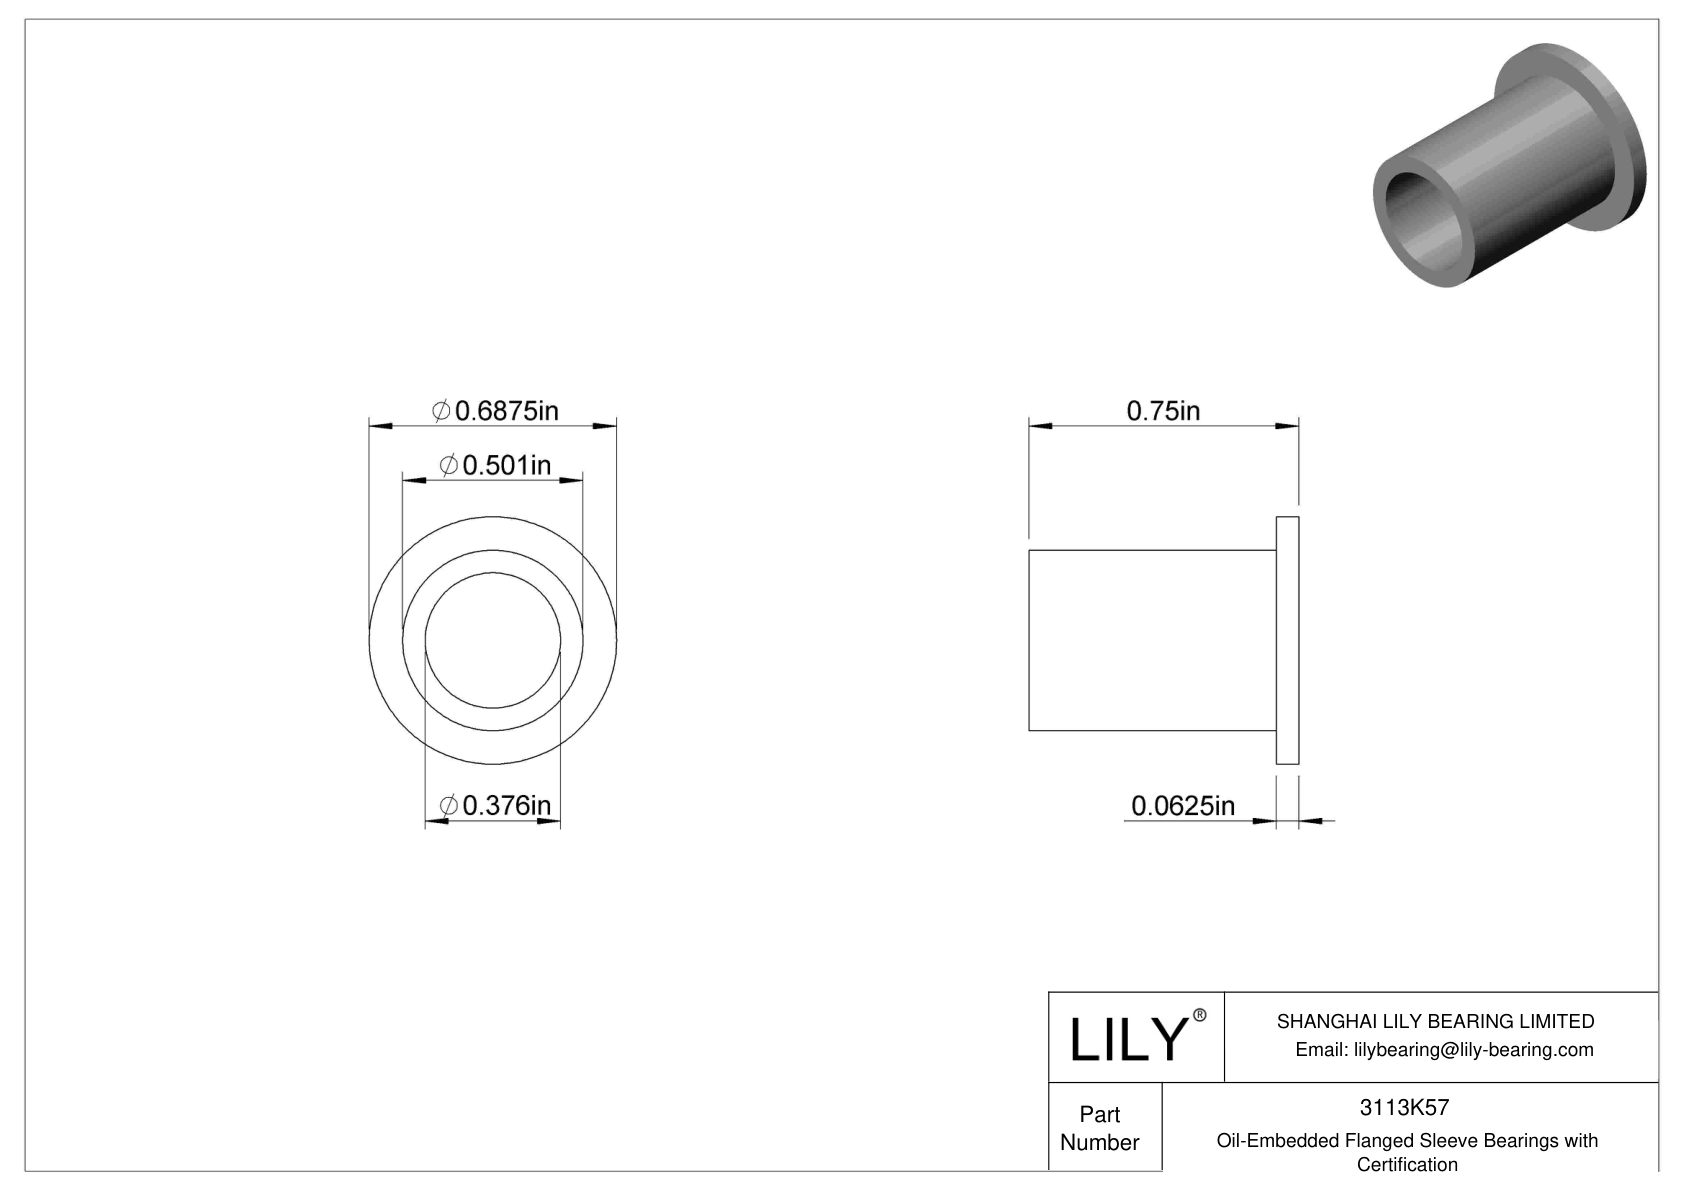 DBBDKFH Oil-Embedded Flanged Sleeve Bearings with Certification cad drawing